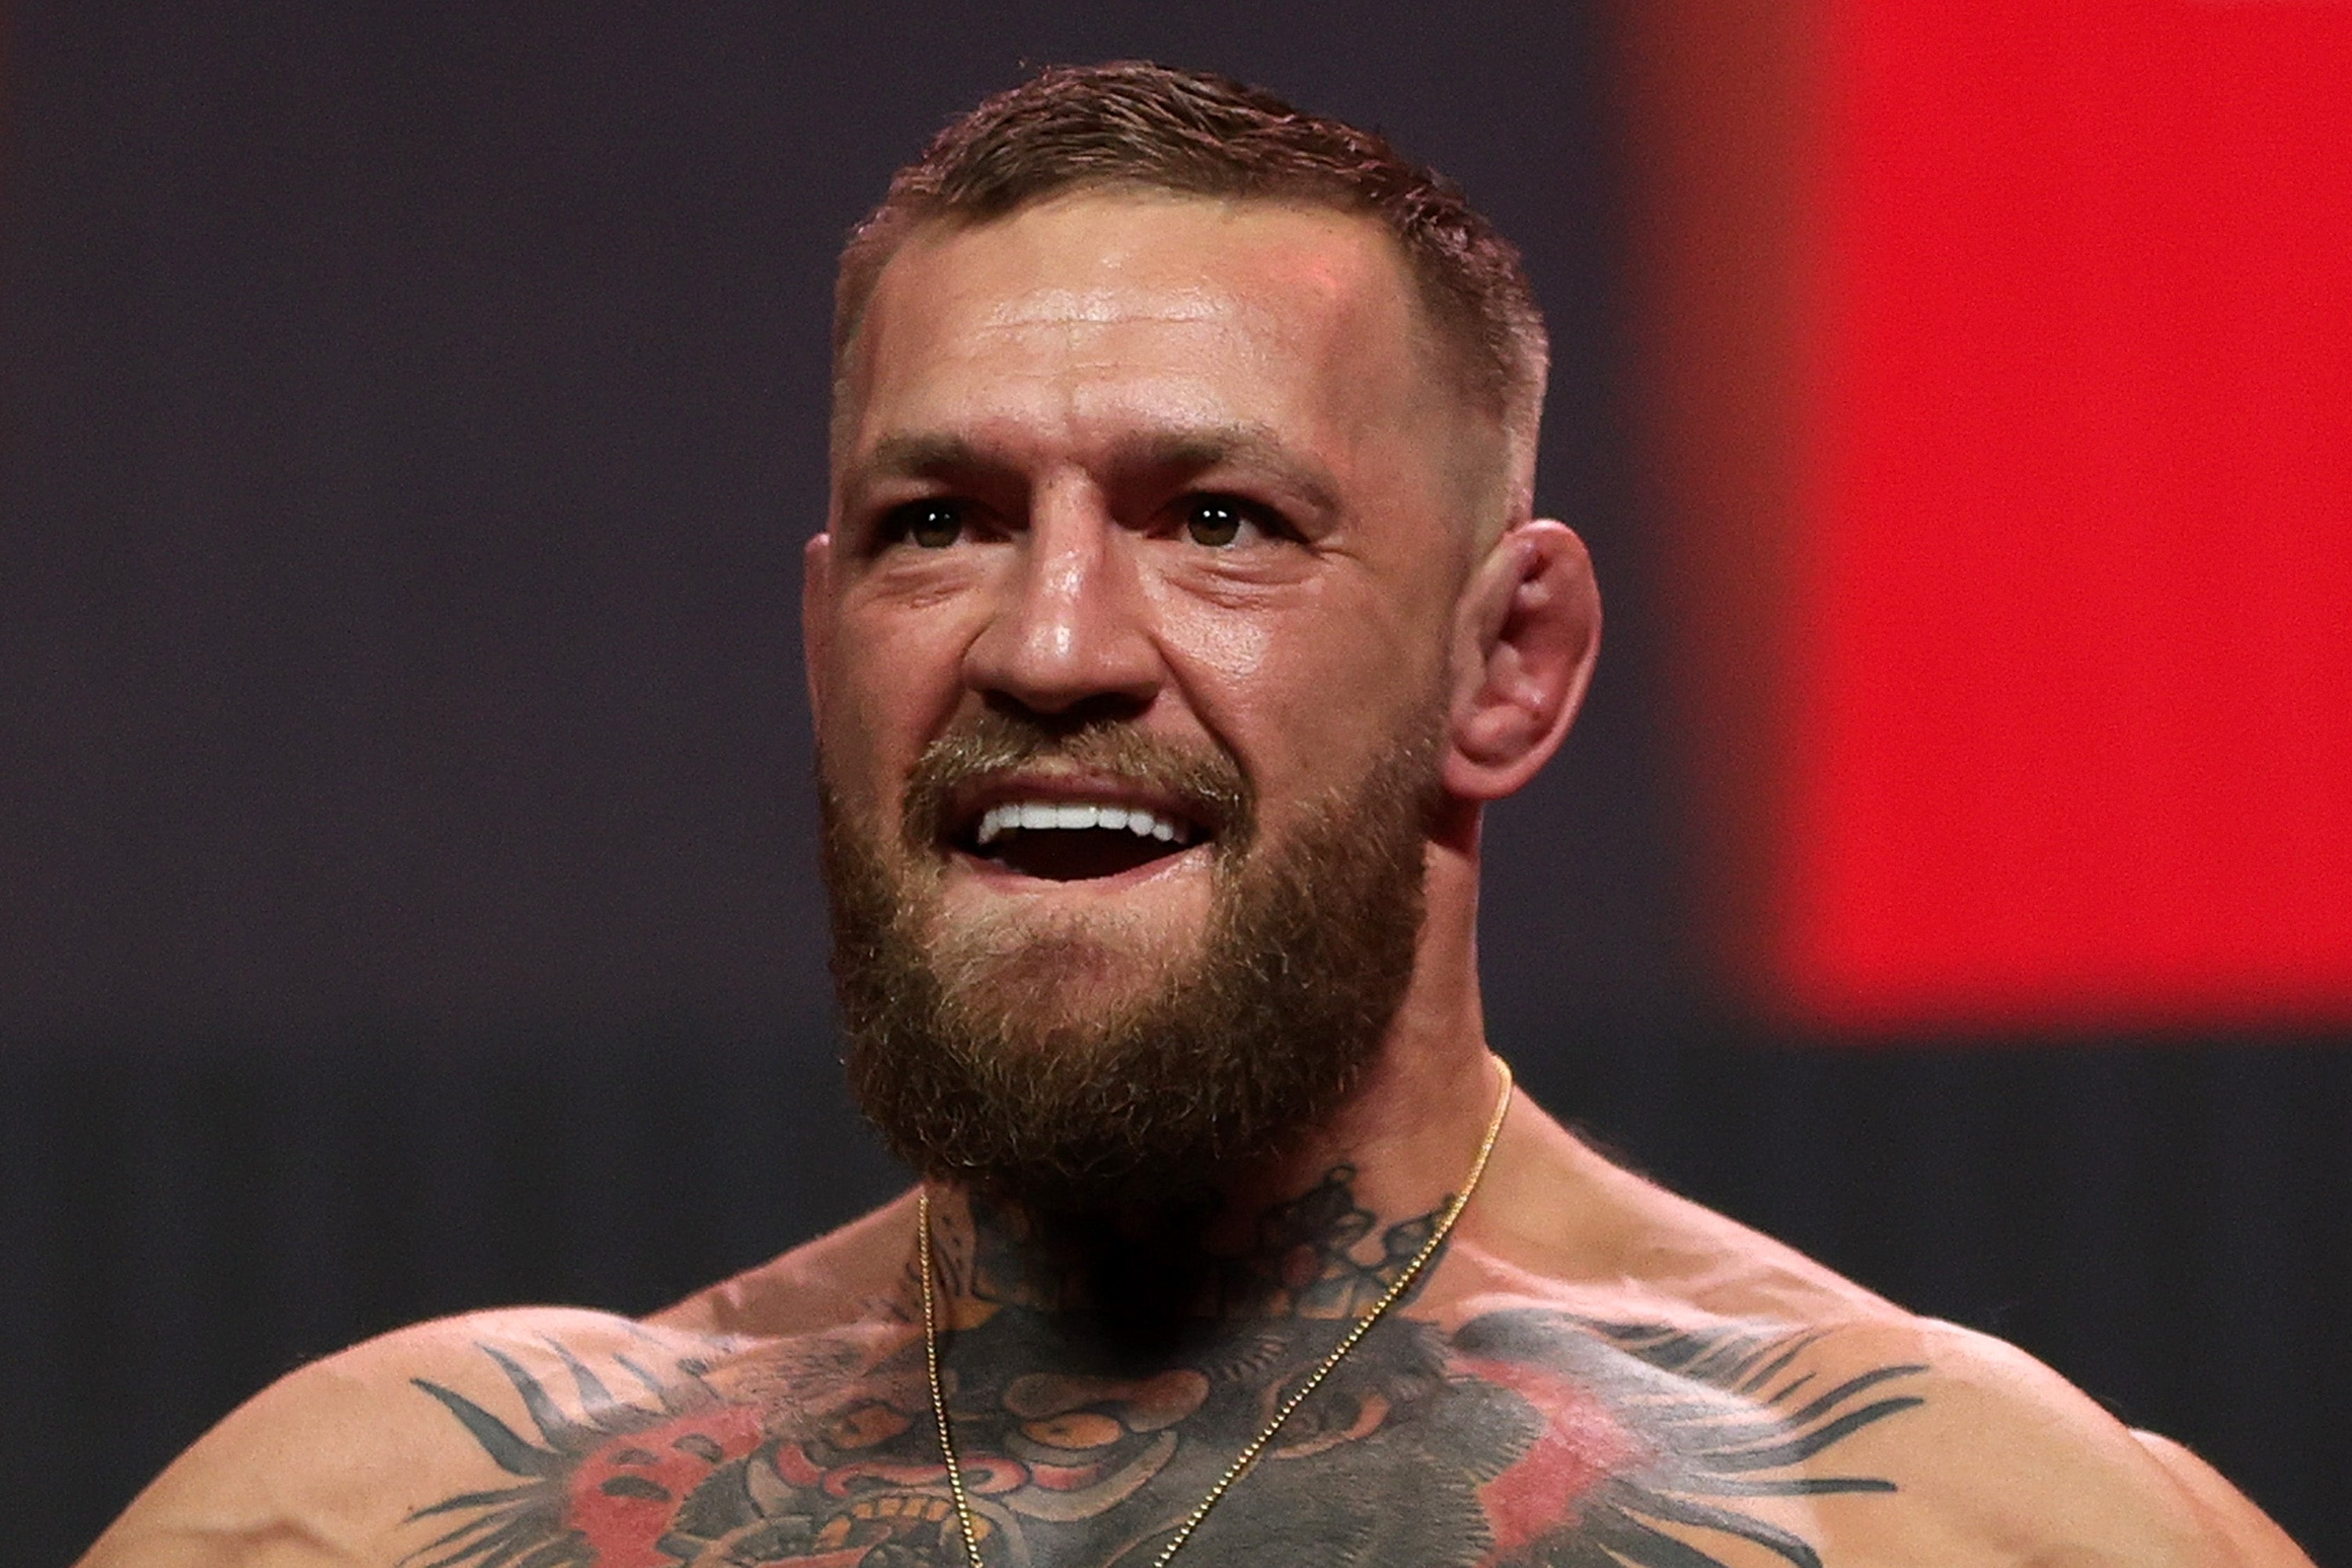 Conor McGregor has been accused of punching a successful Italian DJ.